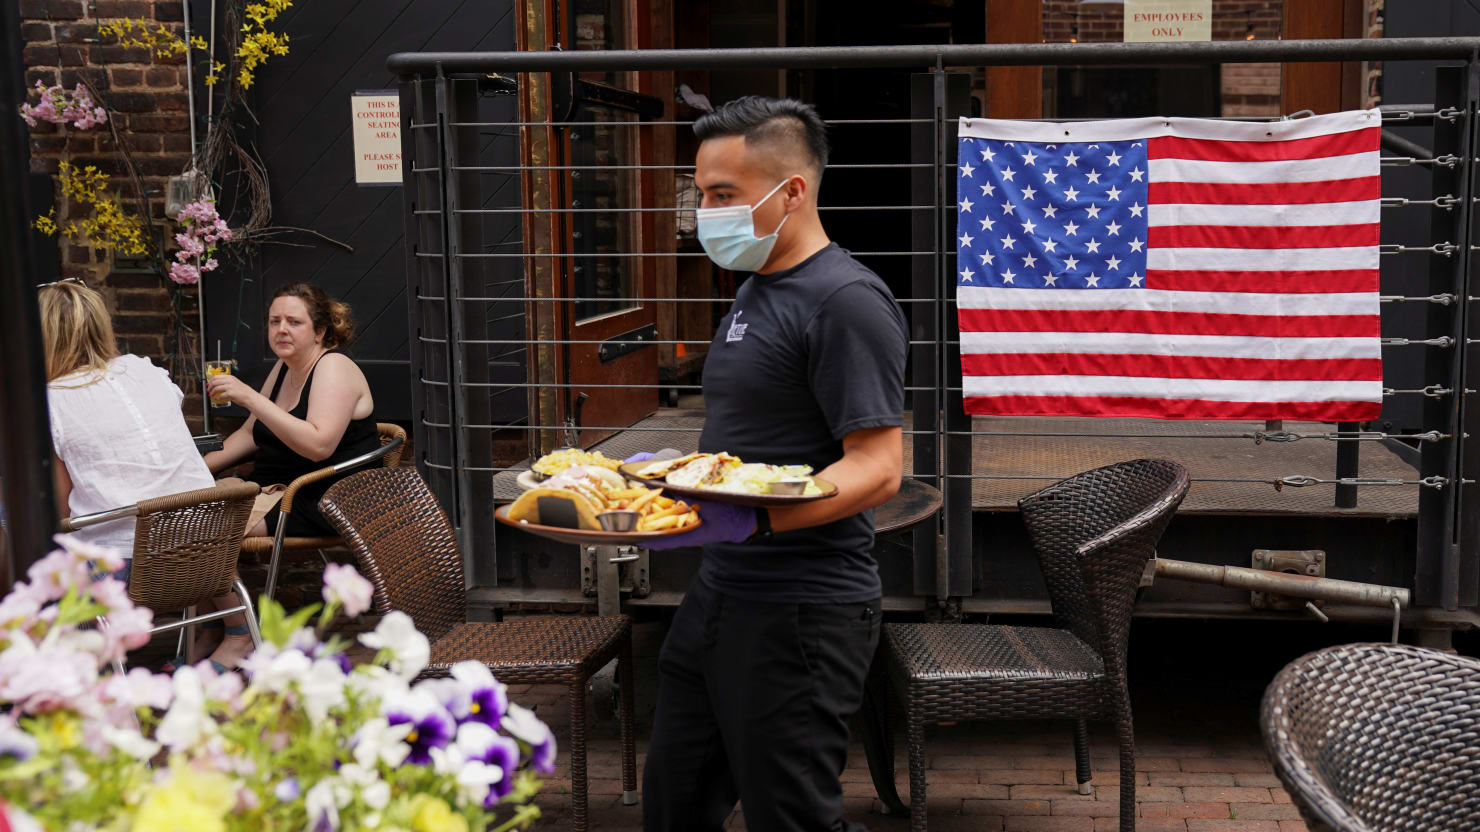 Waiters’ advice can be drawn from restaurant owners in the latest Trump administration law, report says